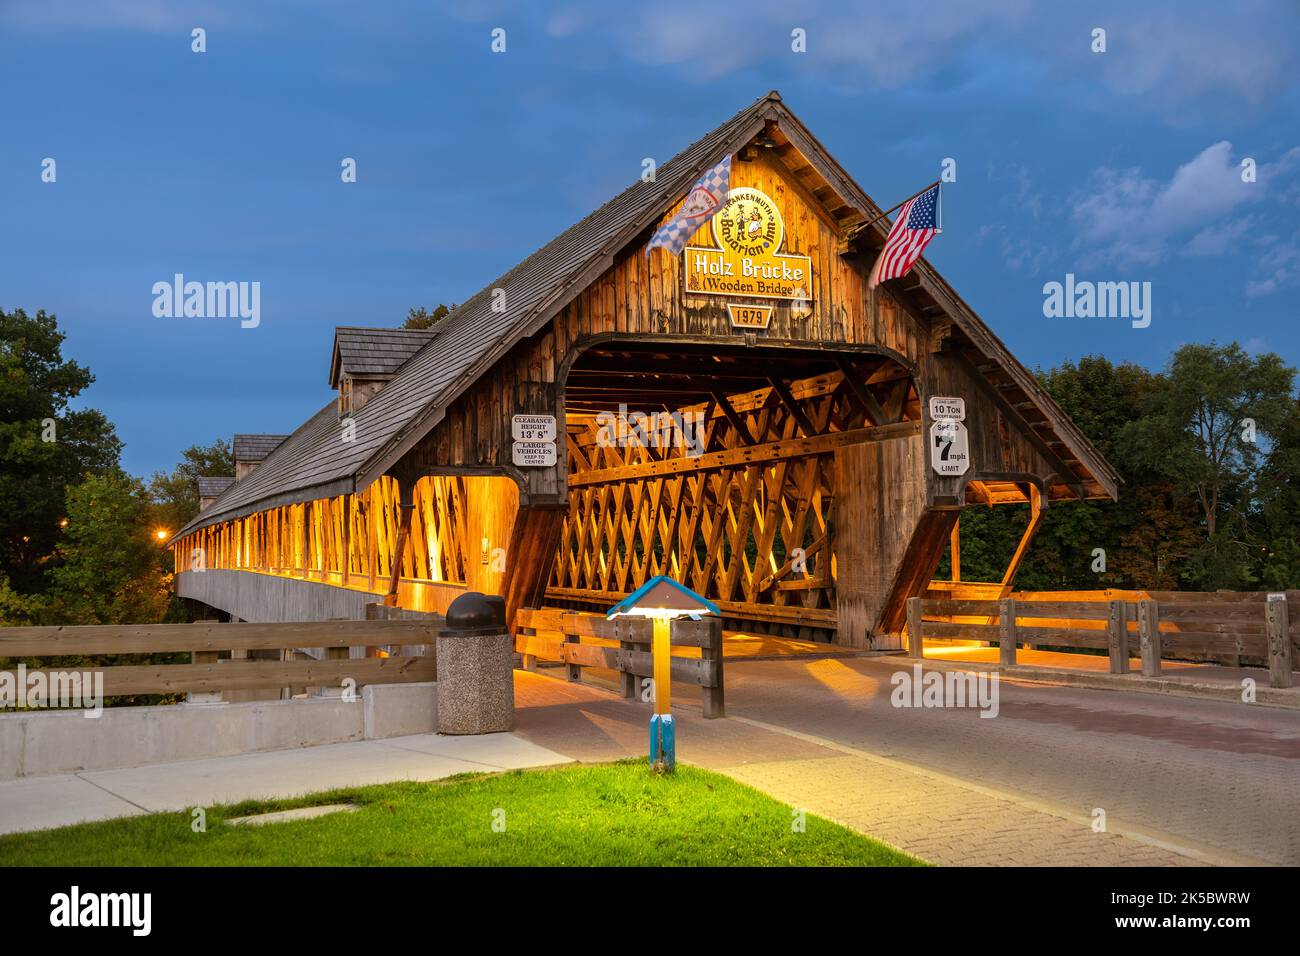 Frankenmuth Wooden Covered Bridge At Night, Holz Brucke Built By The Bavarian Inn Crossing The Cass River  In The Bavarian Town Of frankenmuth In Mich Stock Photo